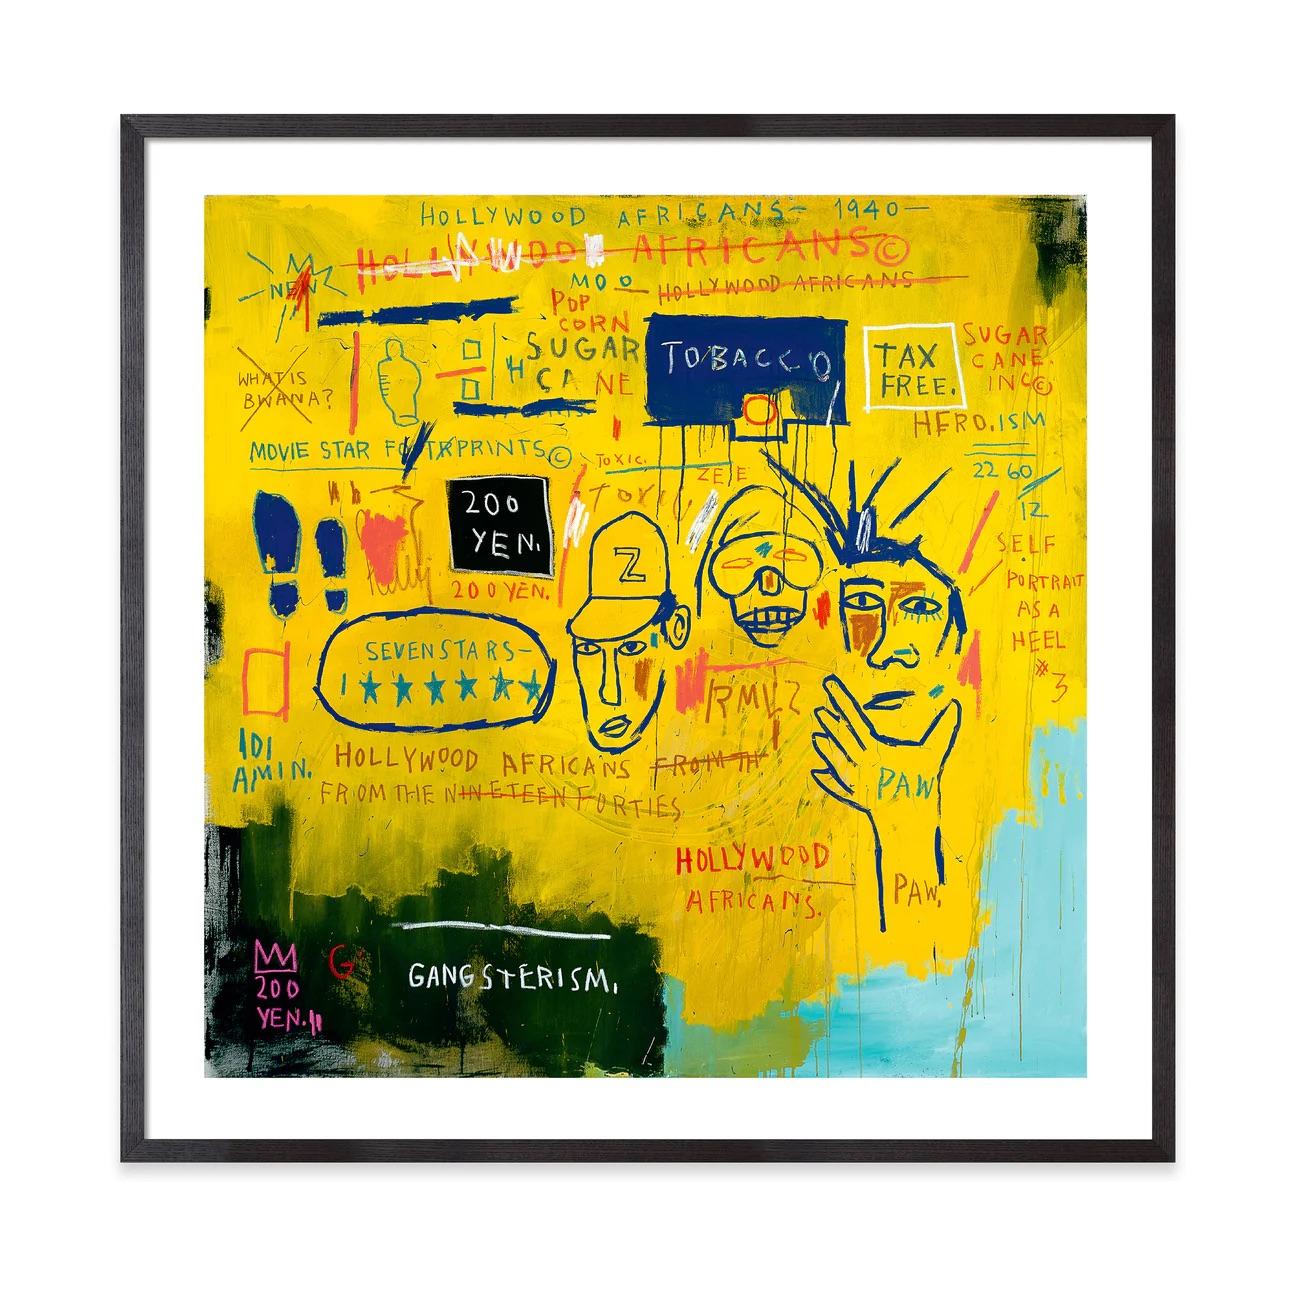 Jean-Michel Basquiat
Hollywood Africans, 1983/2021
Print on heavy watercolor paper and framed in black solid wood with a white acid-free mat and gallery acrylic finish
29 × 29 × 1 in  73.7 × 73.7 × 2.5 cm
Frame included

This Jean-Michel Basquiat